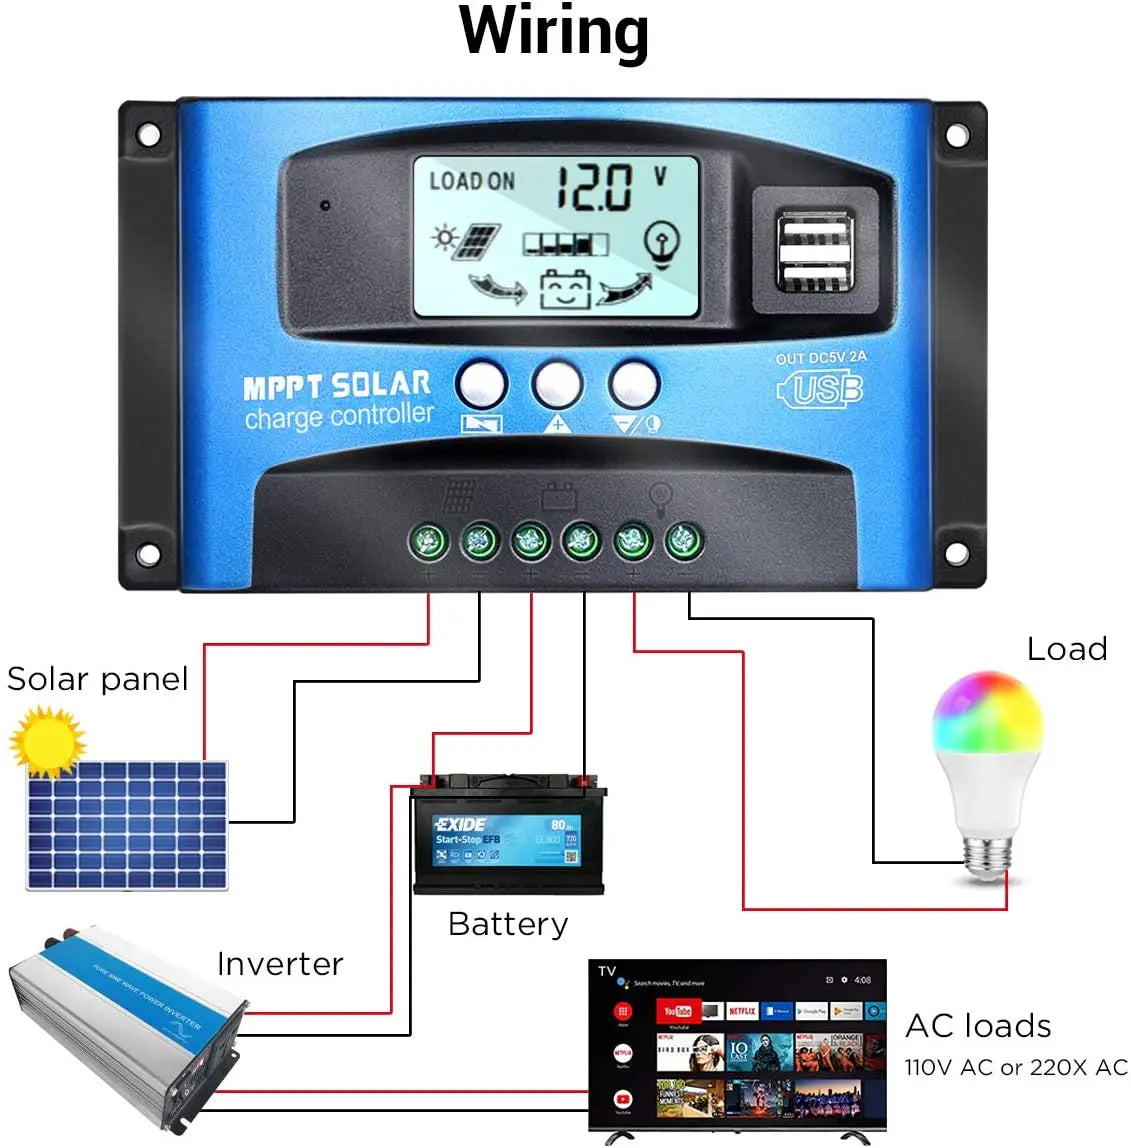 10A-100A MPPT Solar Controller, Solar controller with LCD display, USB ports, and MPPT technology for charging batteries and powering devices.